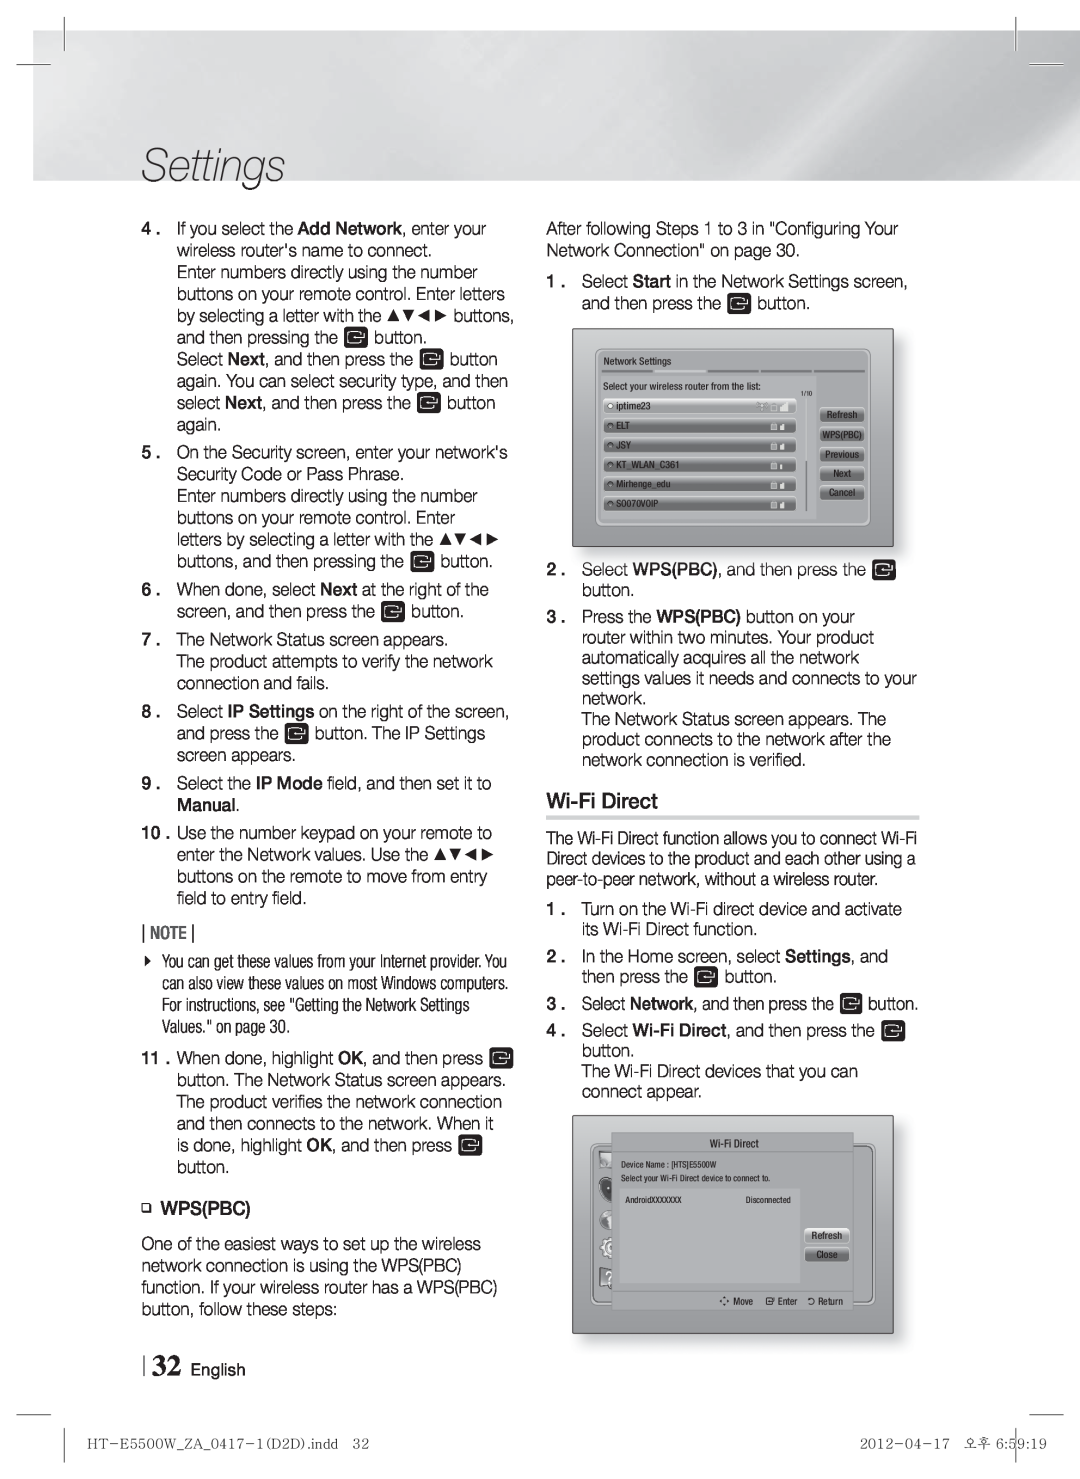 Samsung HT-E550 user manual Settings, Wi-FiDirect, Note 